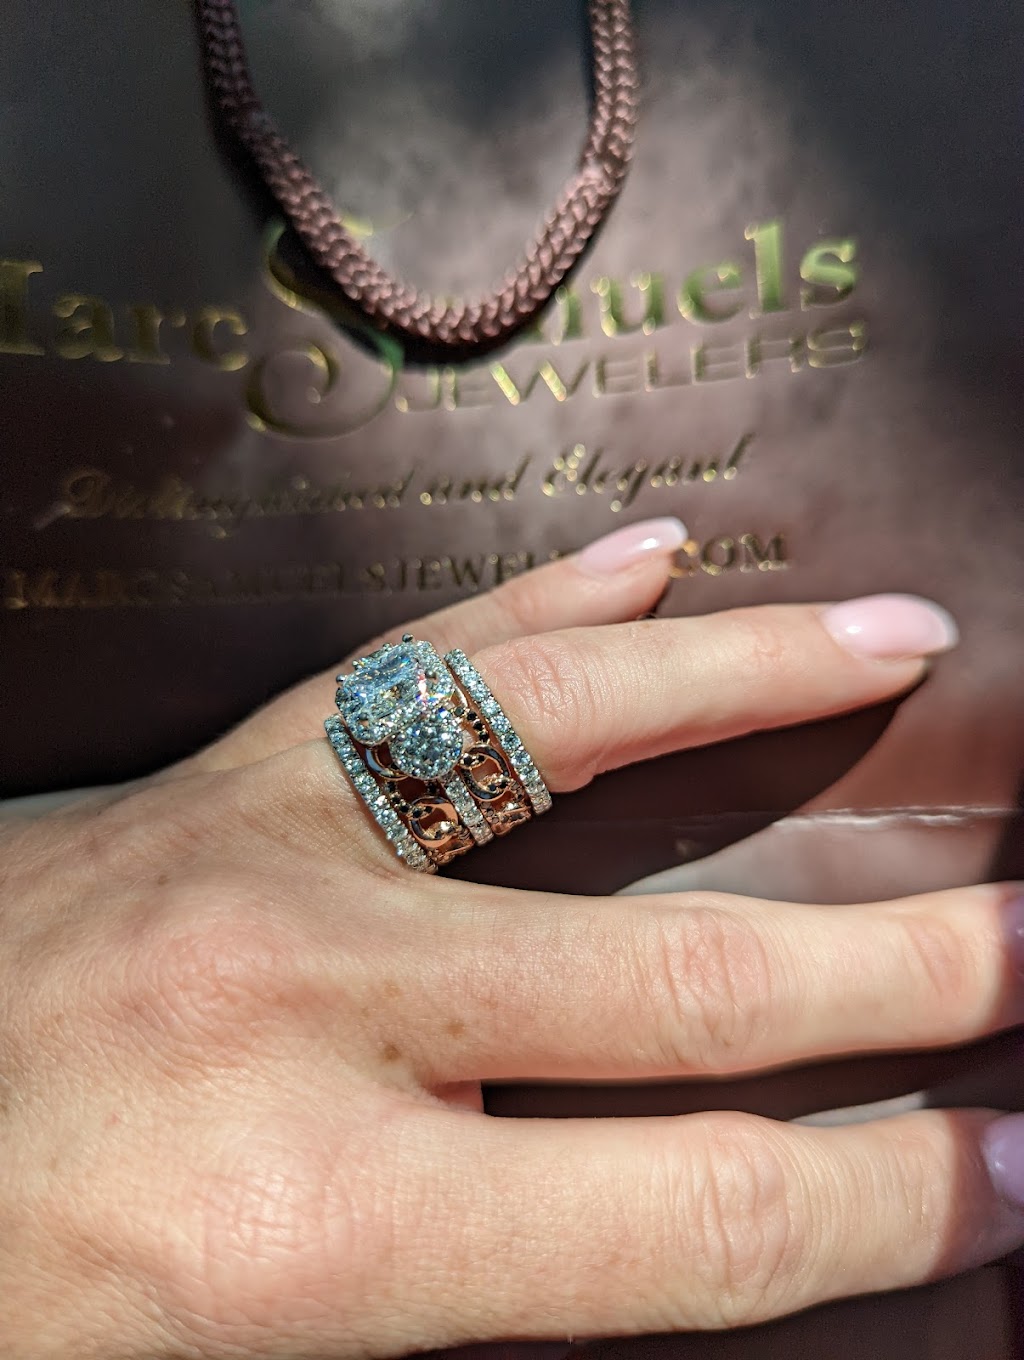 Marc Samuels Jewelers | 8549 Gaylord Pkwy Suite #113, Frisco, TX 75034, USA | Phone: (469) 362-8786